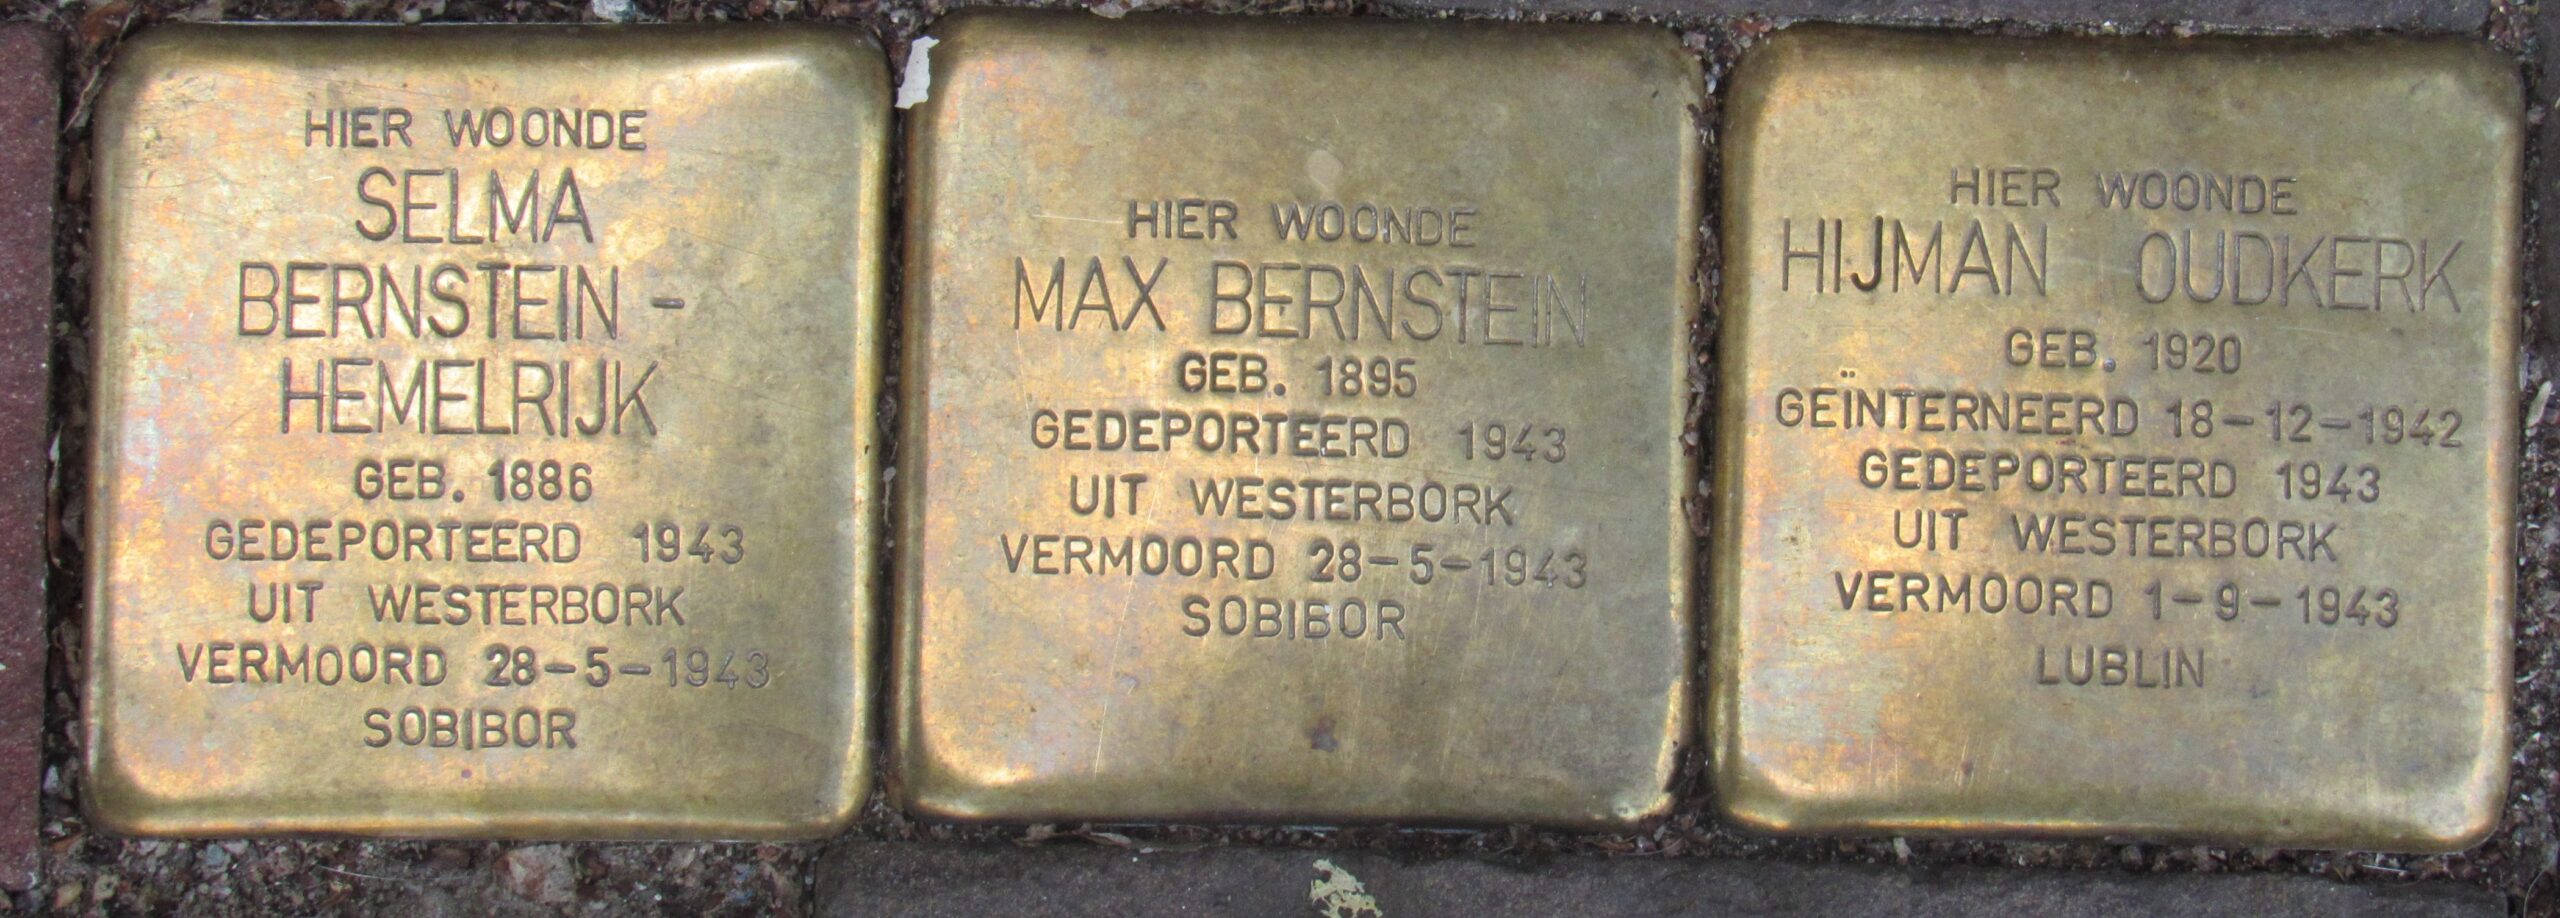 Brass plaques of Jews removed from Amsterdam by Nazis during world war 2